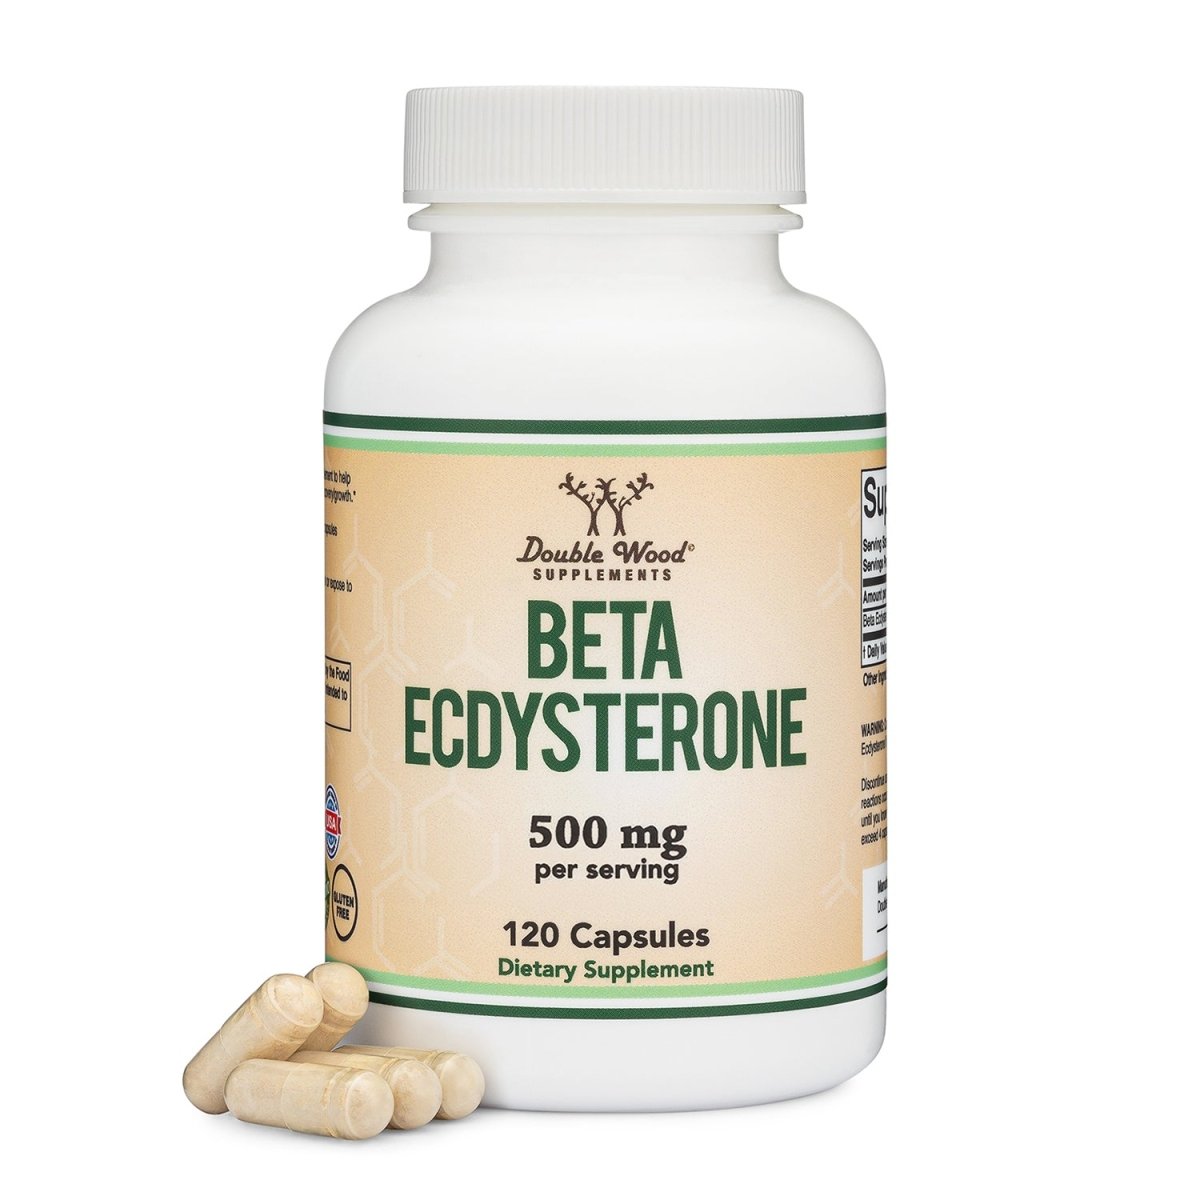 Beta Ecdysterone Double Pack - Double Wood Supplements